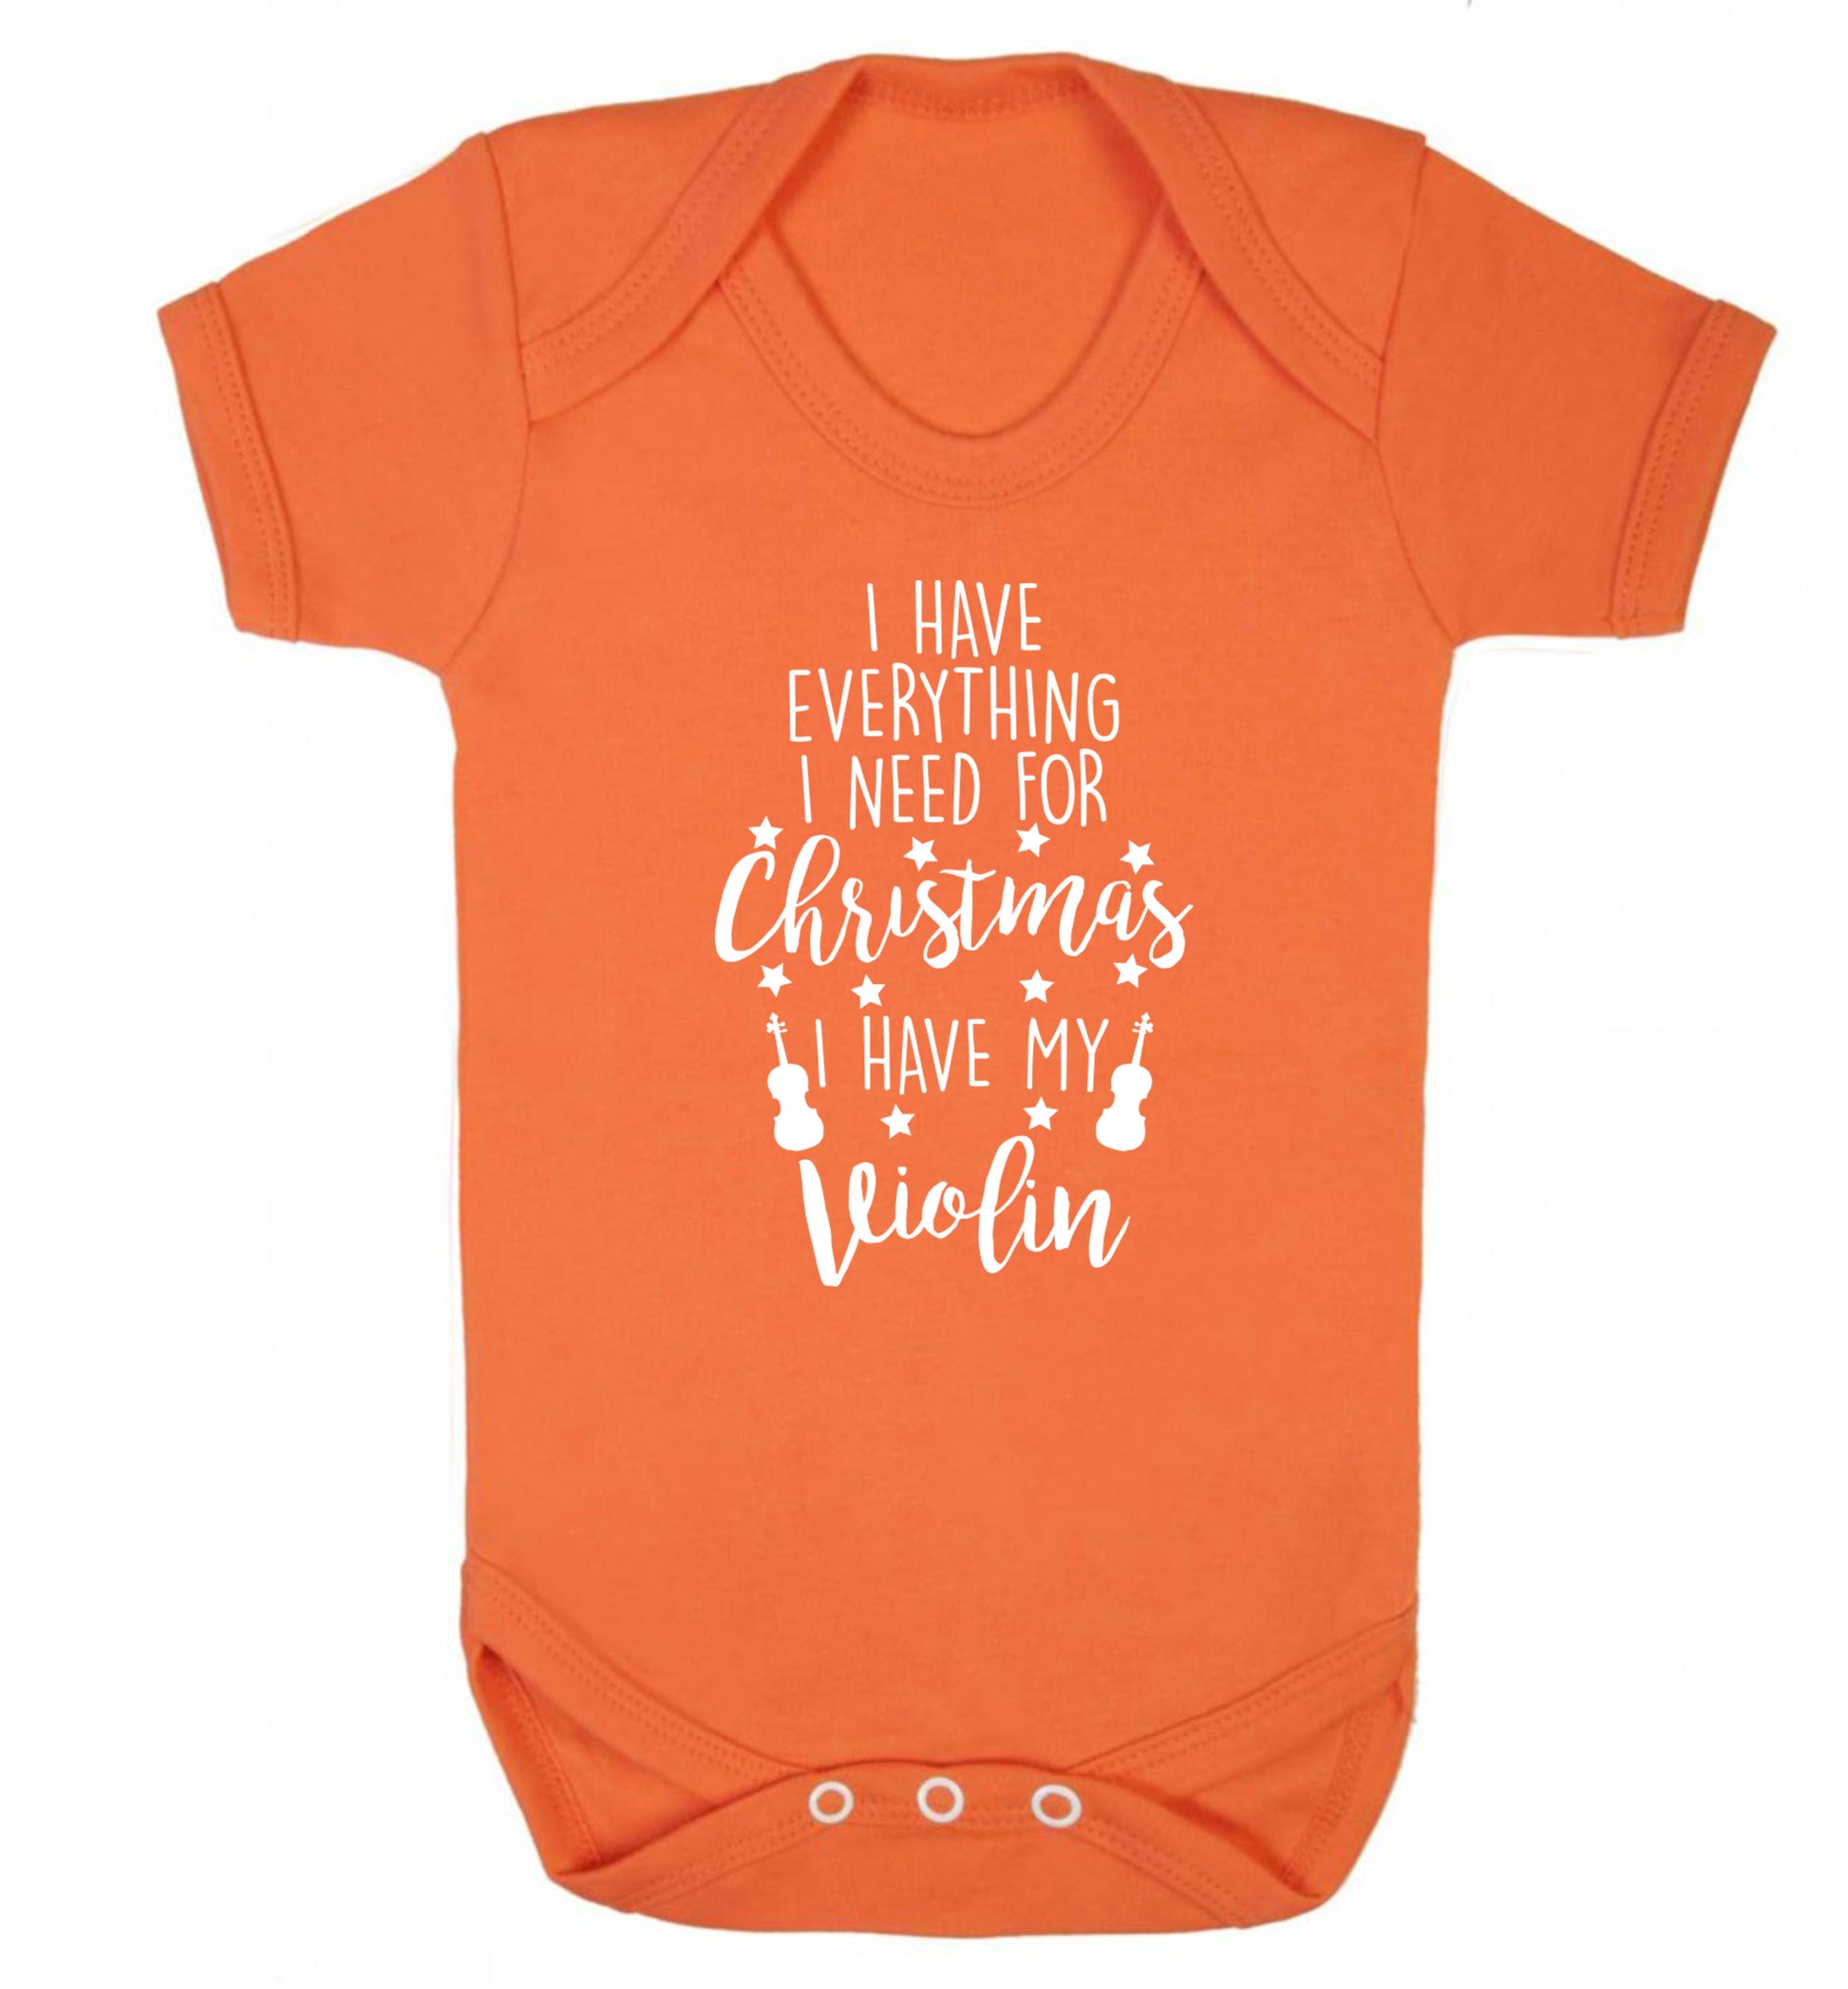 I have everything I need for Christmas I have my violin Baby Vest orange 18-24 months